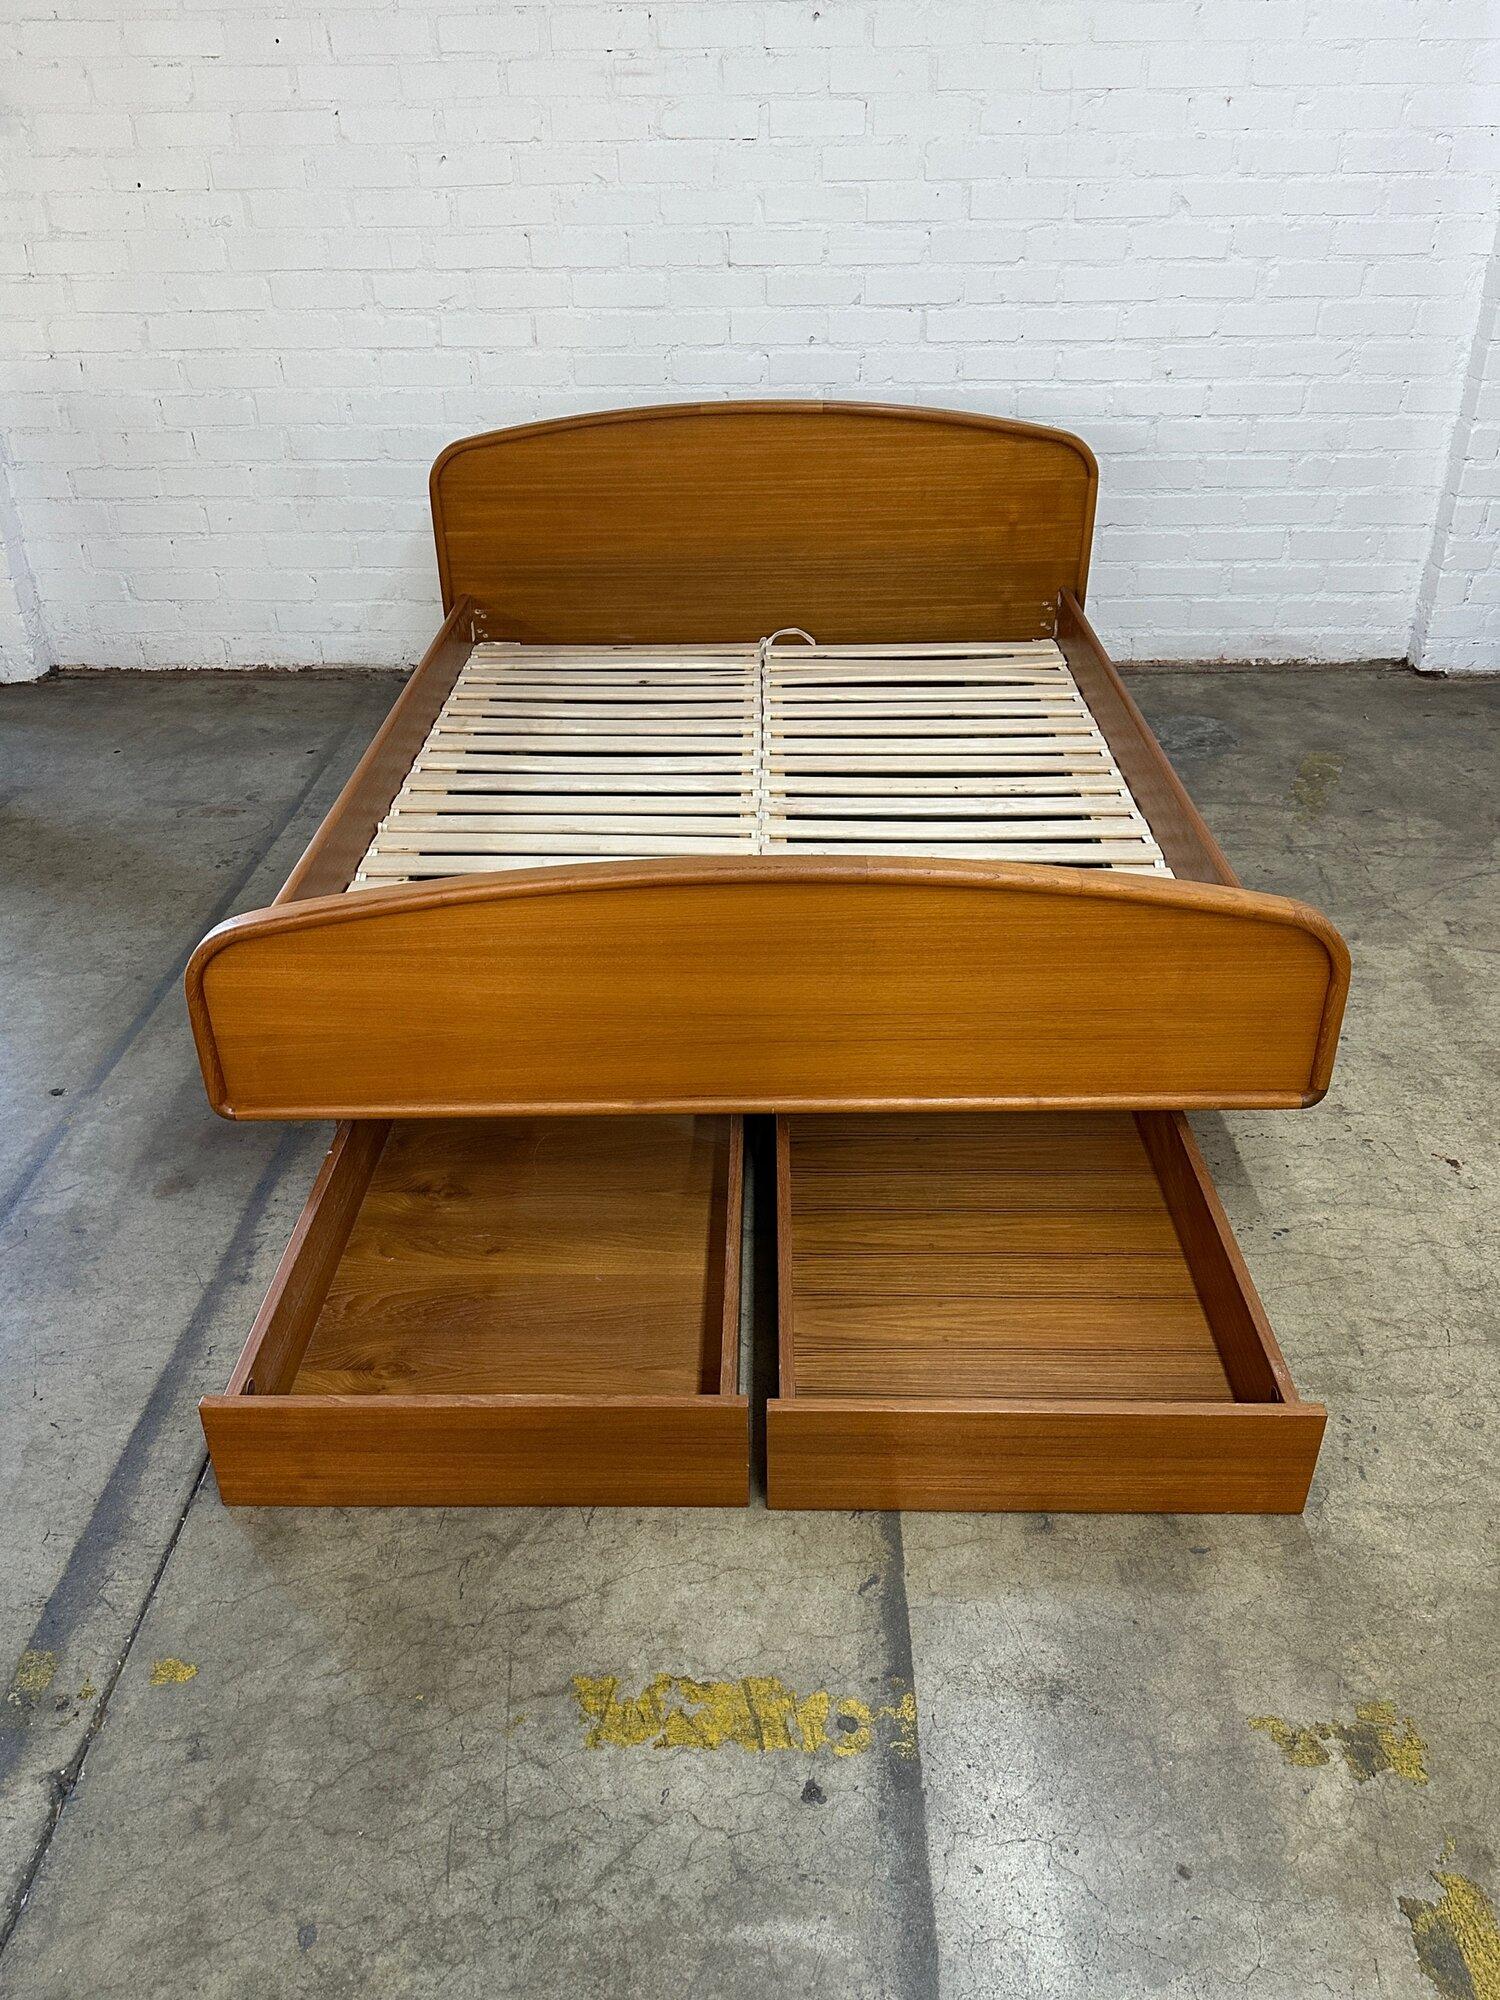 W68 D84 H35.5 H17

INNER BED W60 D81 H6

Fully refinished Teak Queen Platform bed. Bed features rounded edges at both the headboard and footboard. There is two storage drawers at the bottom of the footboard that roll out against your floor. 